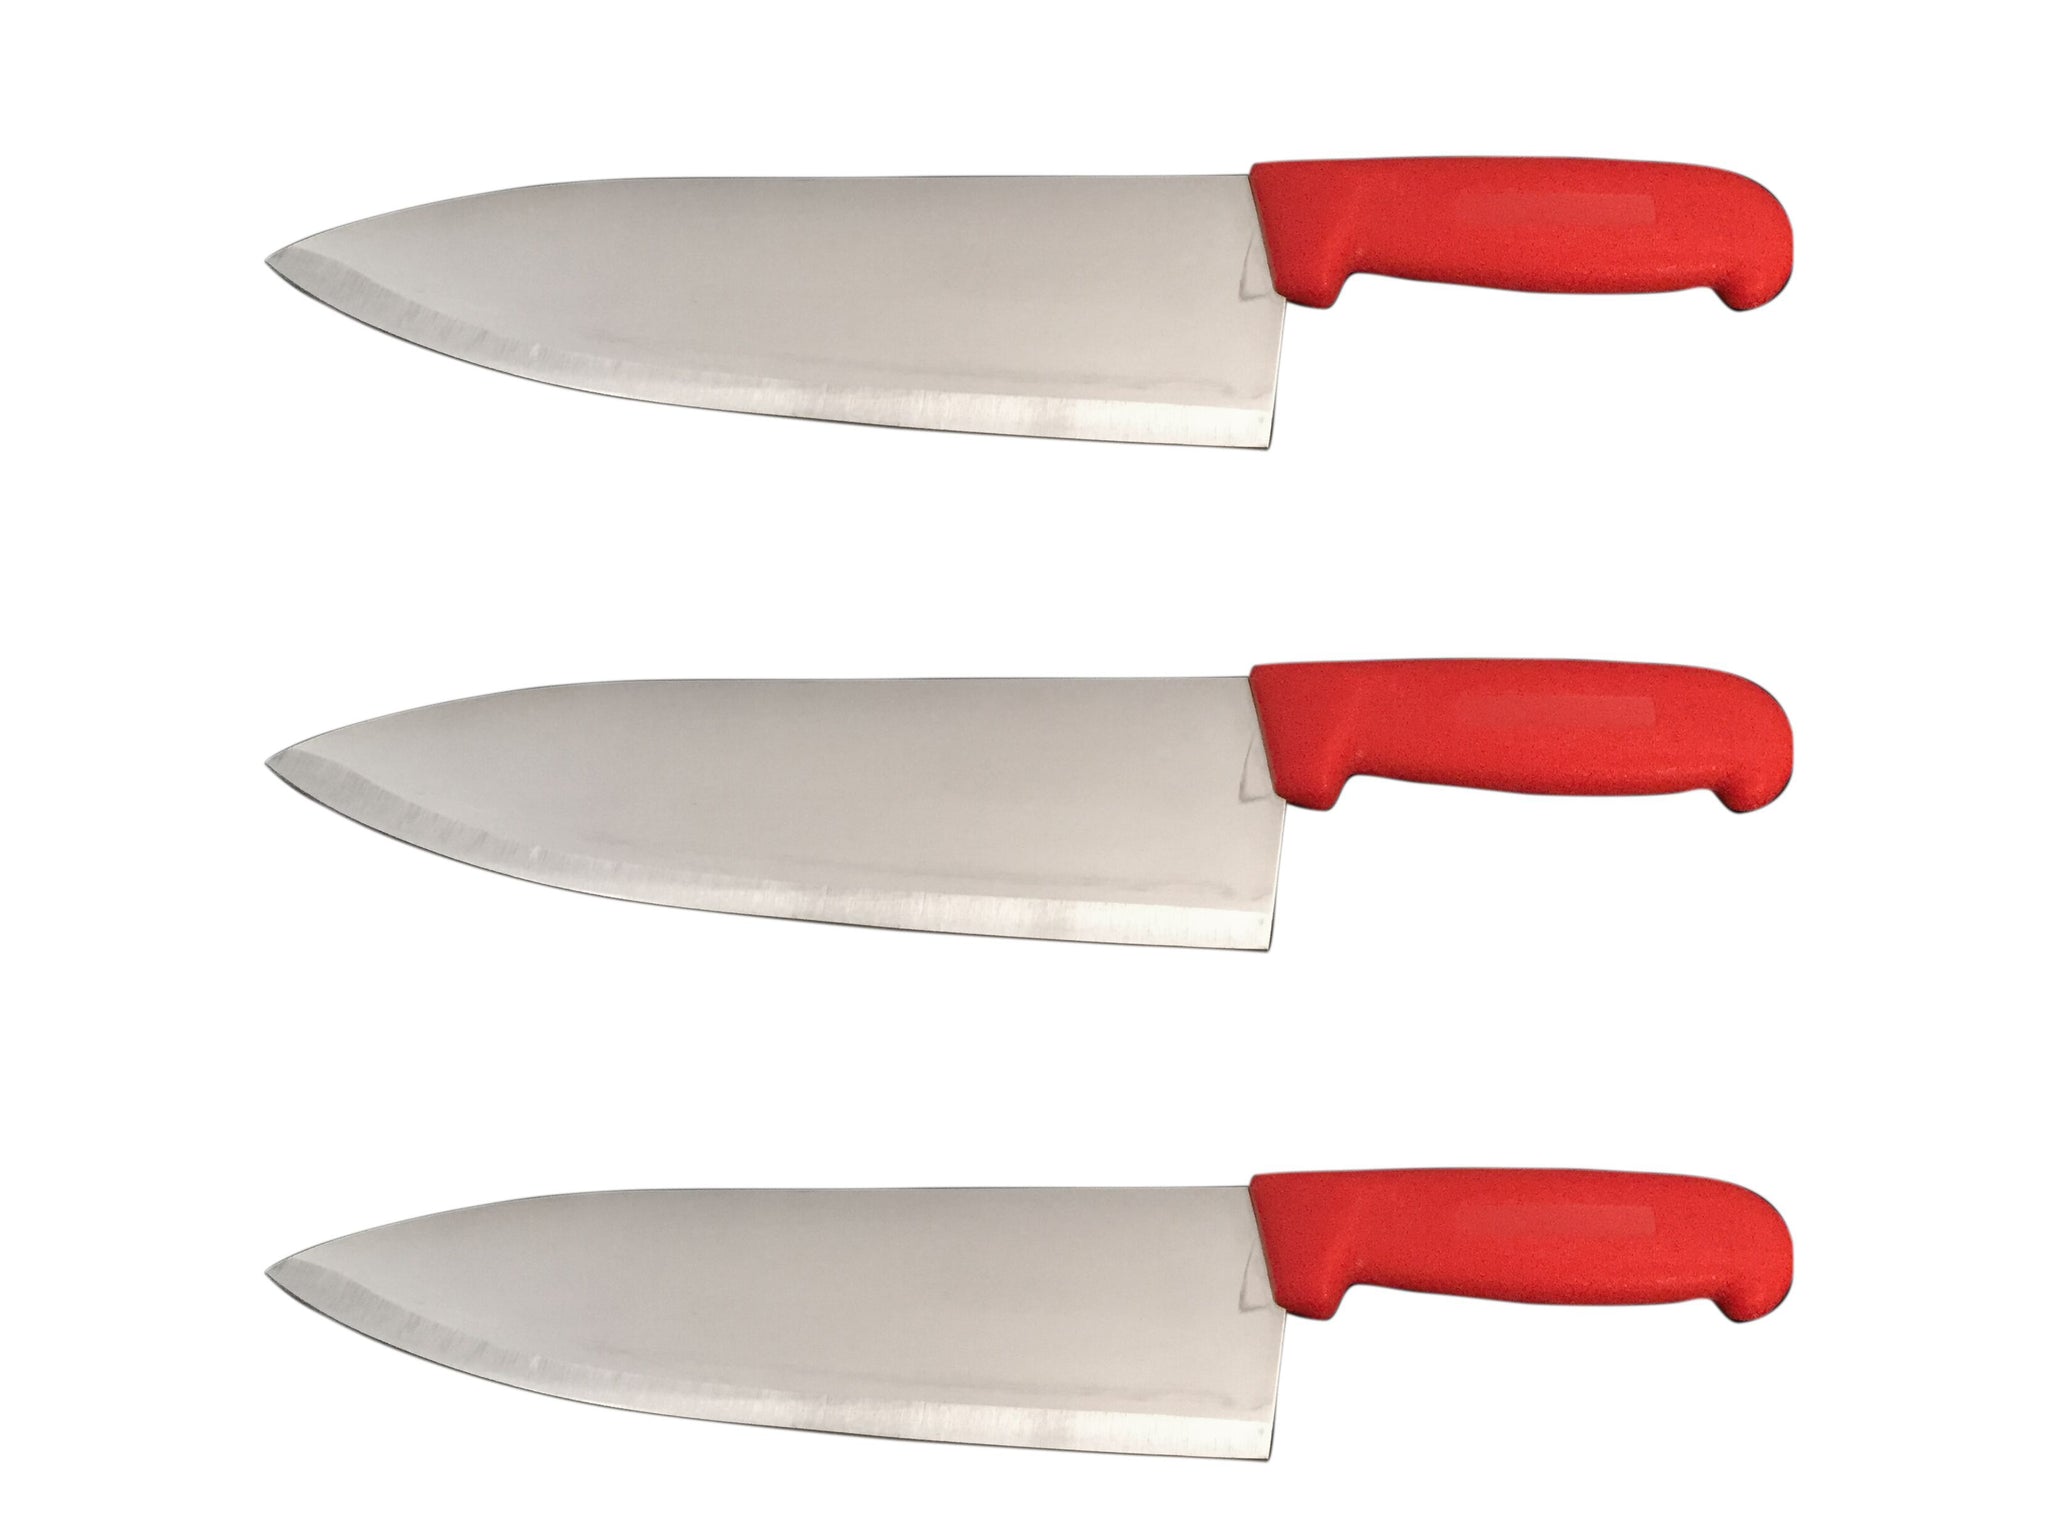 10 Chef Knife Cozzini Cutlery Imports - Choose Your Color